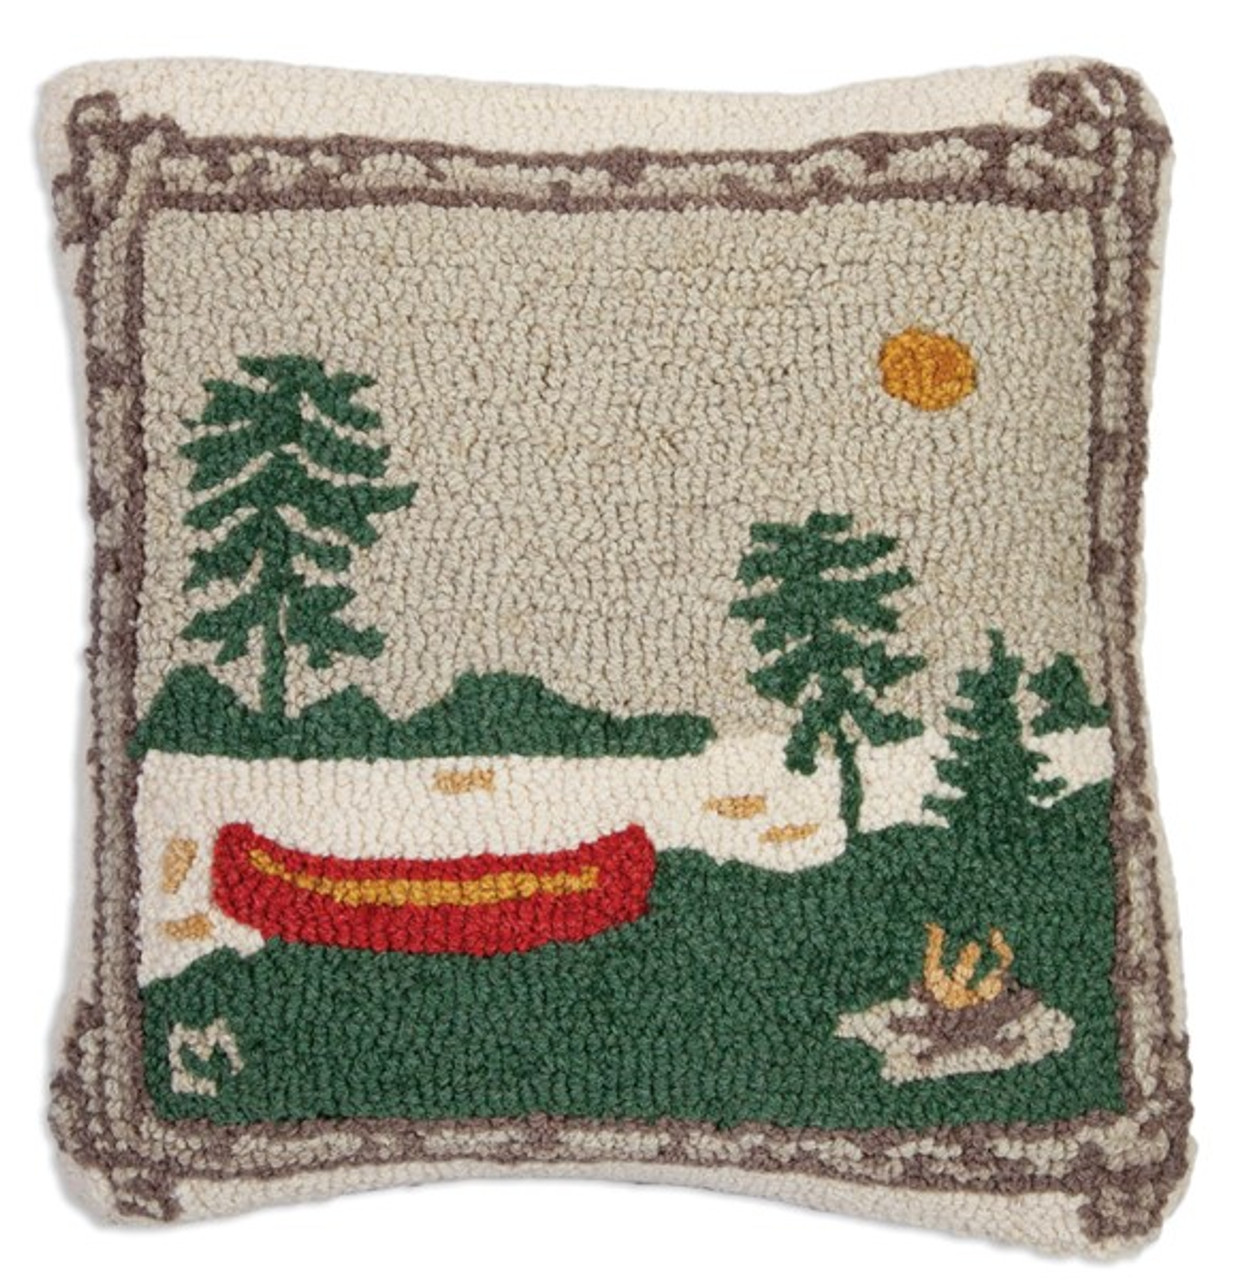 Square Pillow with Tree Embroidery